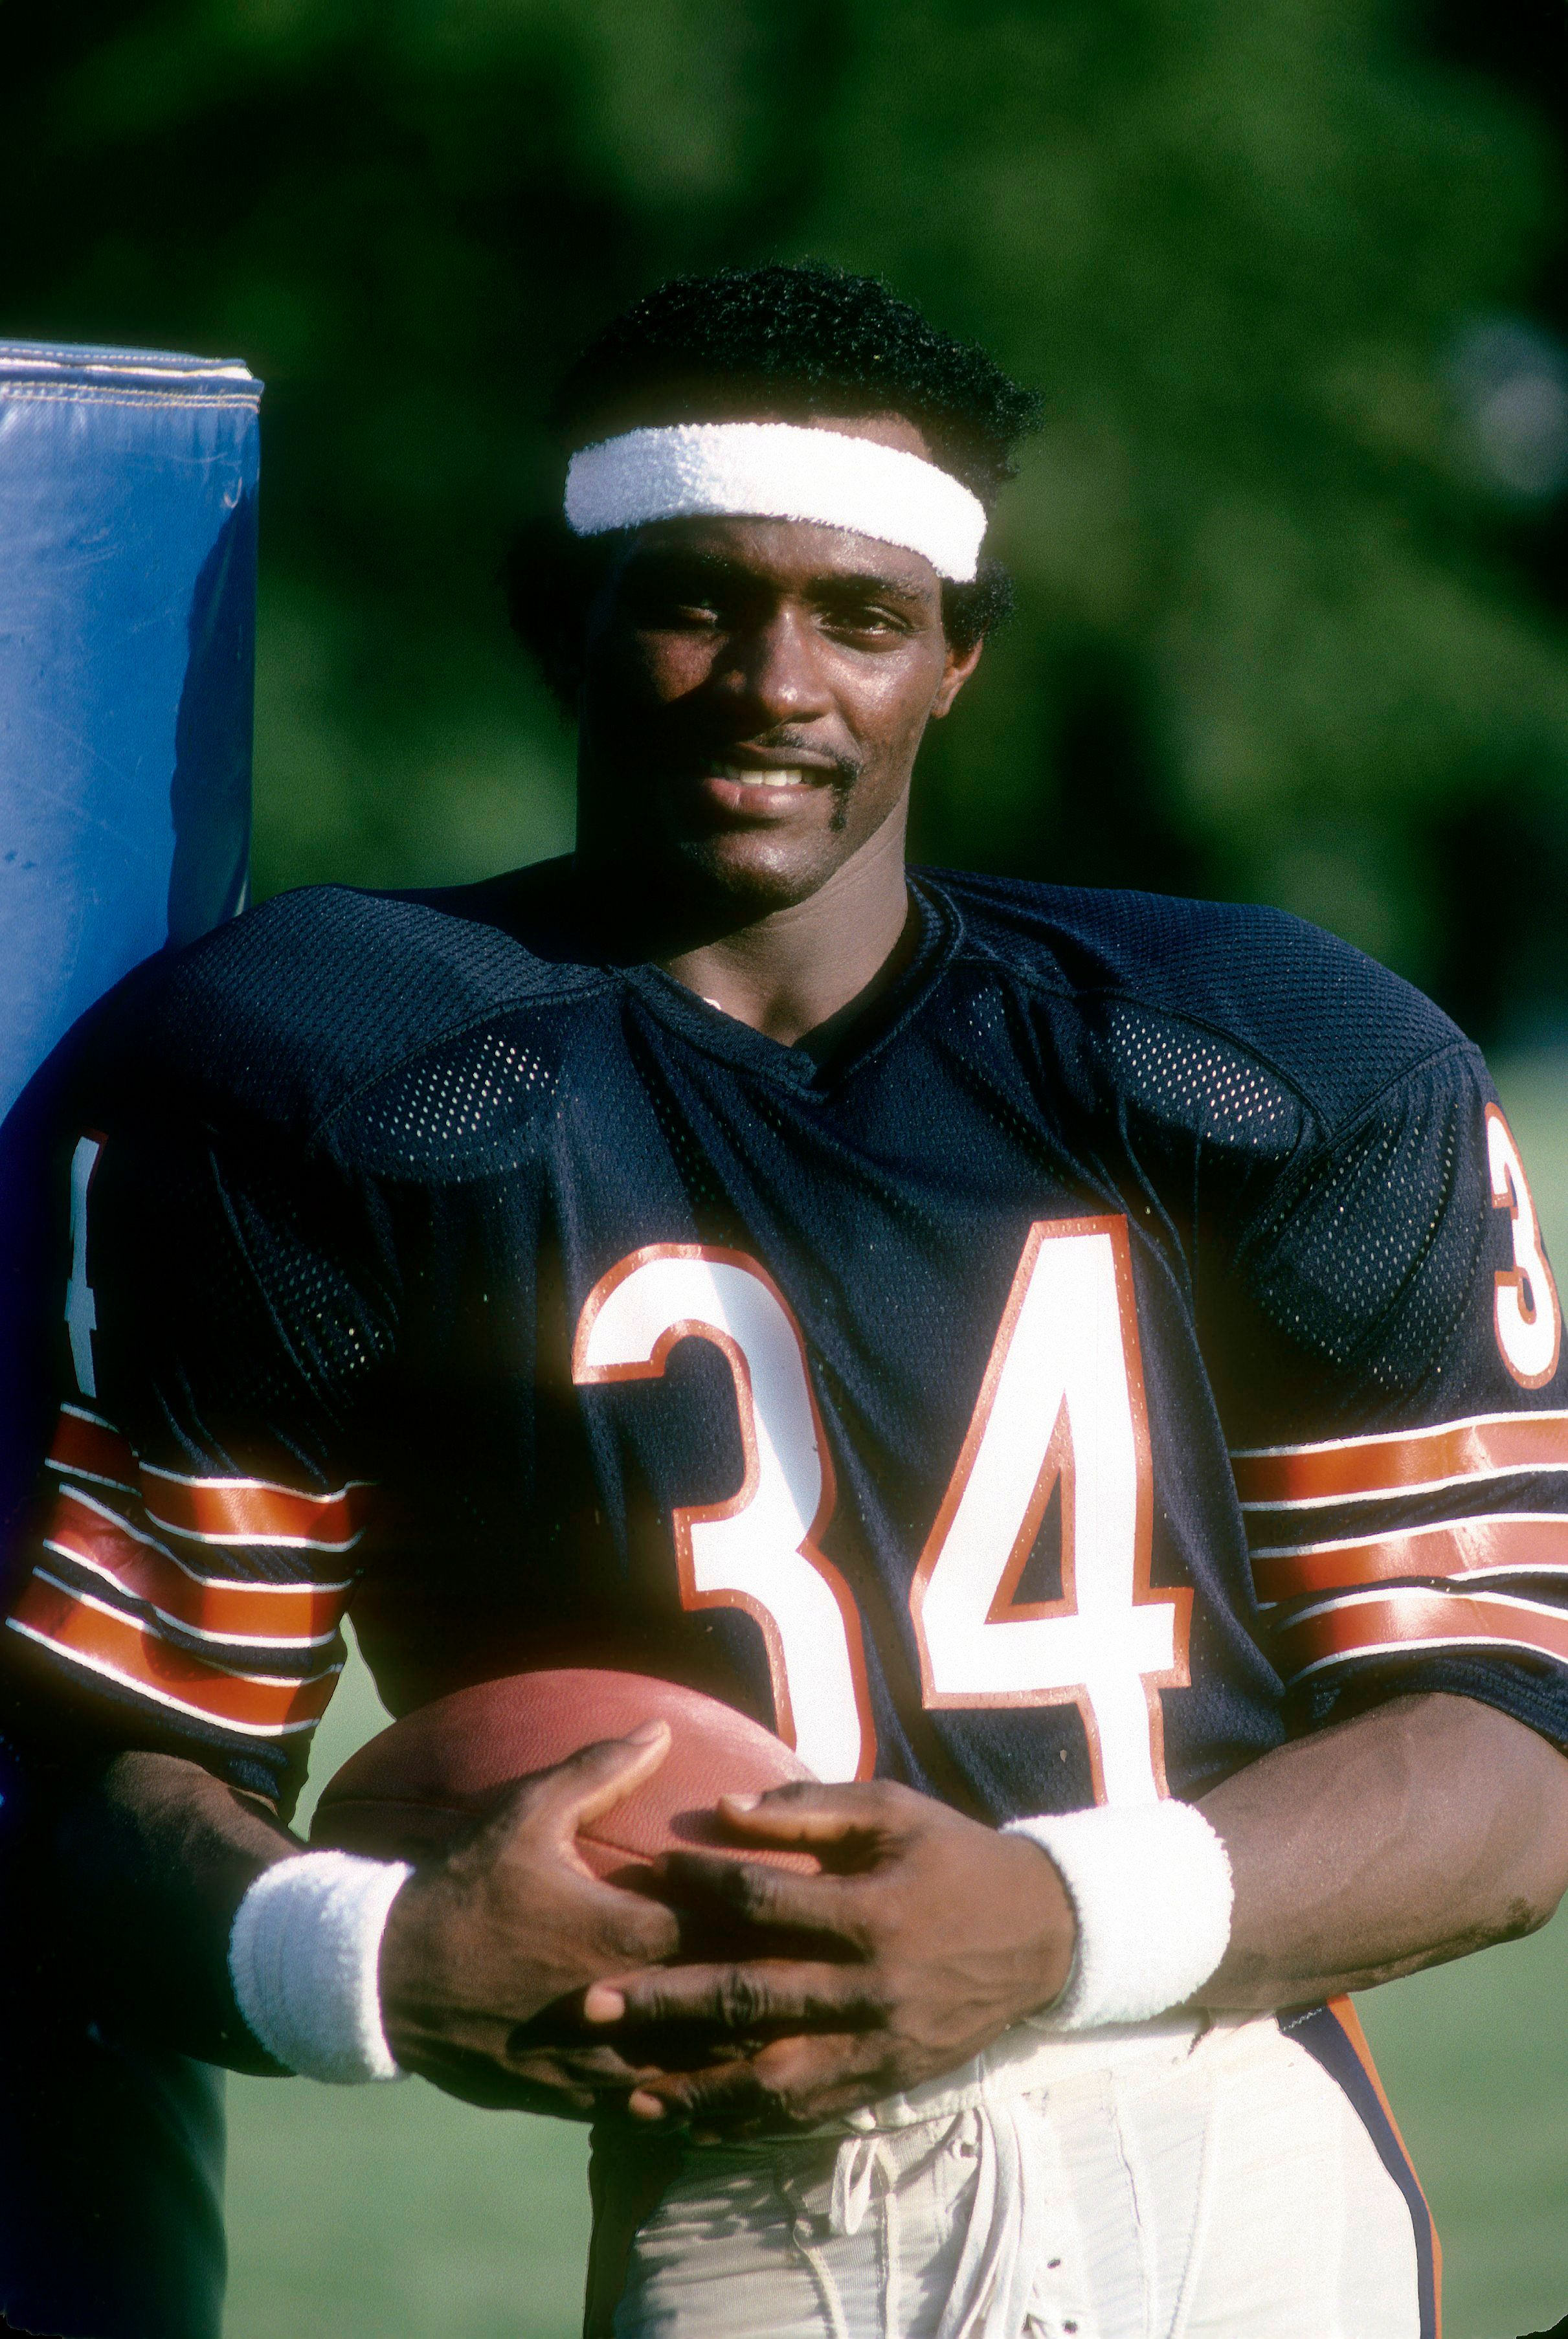 Walter Payton of the Chicago Bears smiles for a photo, circa late 1970's in Chicago, Illinois. | Source: Getty Images